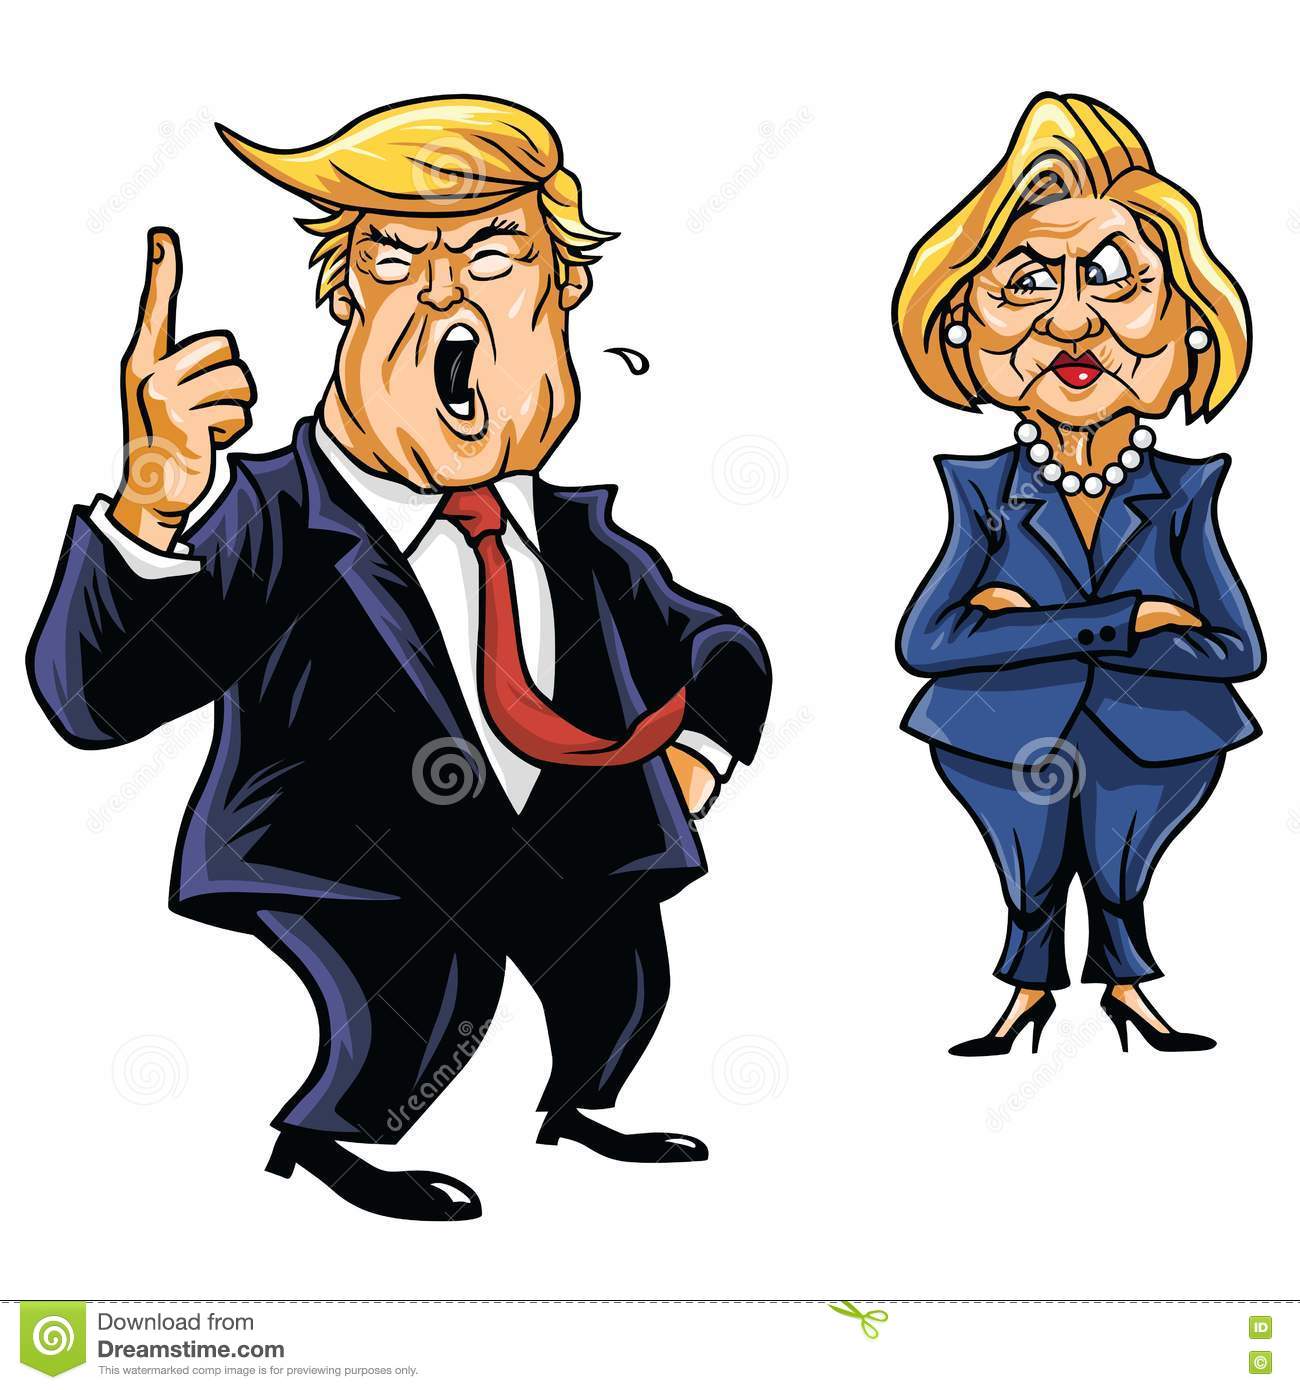 Presidential Candidates Donald Trump Vs Hillary Clinton Royalty Free Stock Image